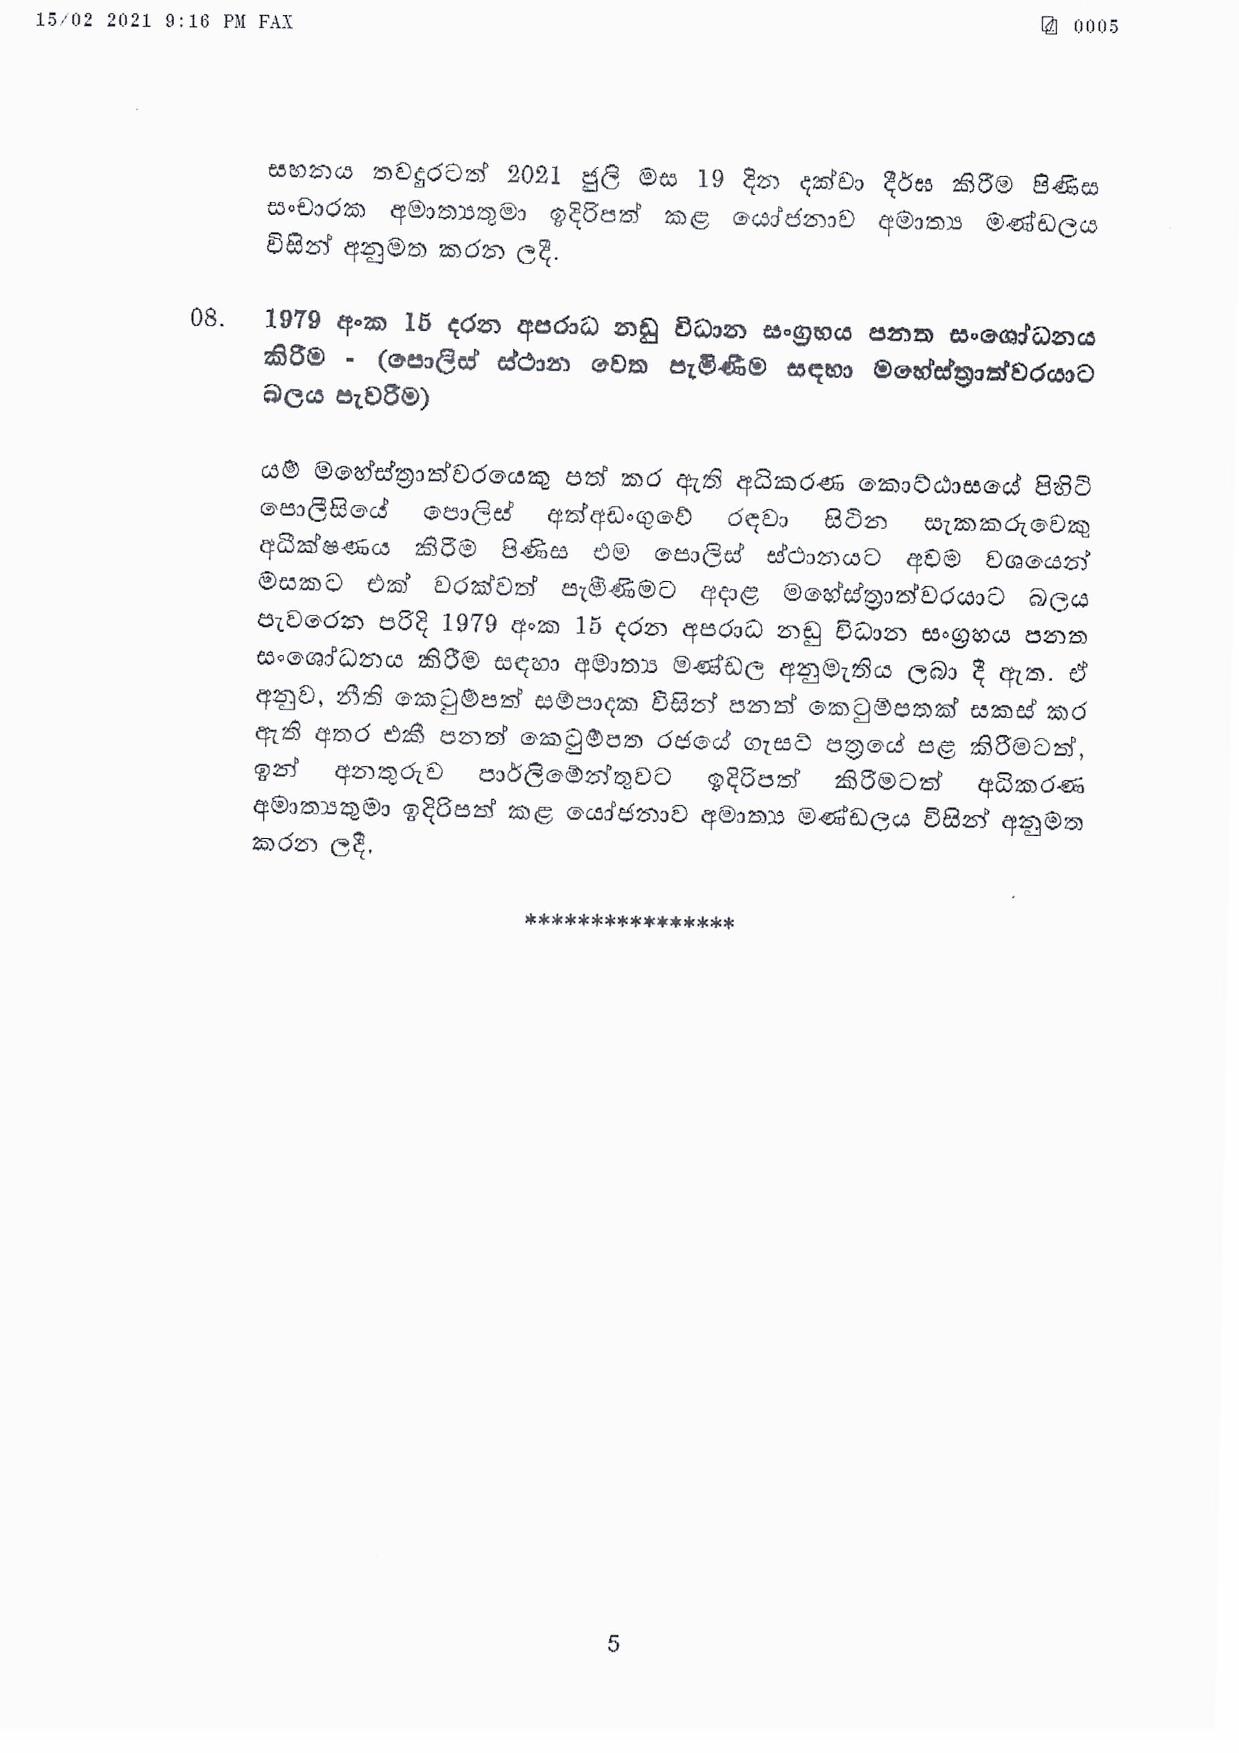 Cabinet Decision on 15.02.2021 page 005